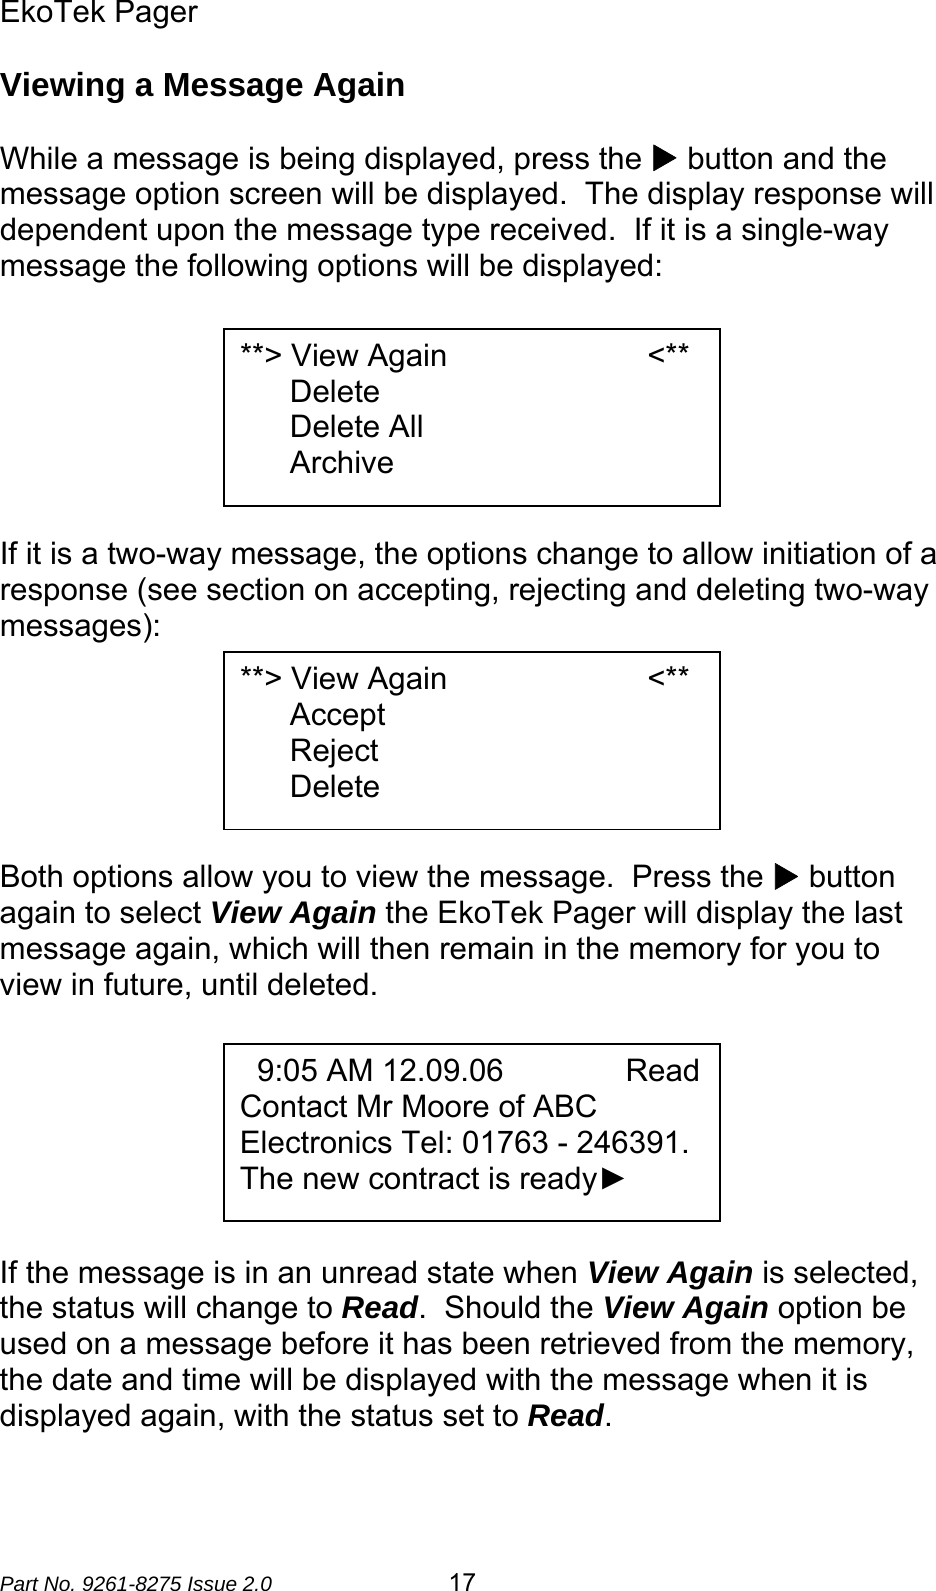 EkoTek Pager  Part No. 9261-8275 Issue 2.0  17 Viewing a Message Again  While a message is being displayed, press the X button and the message option screen will be displayed.  The display response will dependent upon the message type received.  If it is a single-way message the following options will be displayed:        If it is a two-way message, the options change to allow initiation of a response (see section on accepting, rejecting and deleting two-way messages):       Both options allow you to view the message.  Press the X button again to select View Again the EkoTek Pager will display the last message again, which will then remain in the memory for you to view in future, until deleted.        If the message is in an unread state when View Again is selected, the status will change to Read.  Should the View Again option be used on a message before it has been retrieved from the memory, the date and time will be displayed with the message when it is displayed again, with the status set to Read.  **&gt; View Again                       &lt;** Delete Delete All Archive   9:05 AM 12.09.06              Read Contact Mr Moore of ABC Electronics Tel: 01763 - 246391.   The new contract is ready►        **&gt; View Again                       &lt;** Accept Reject Delete 